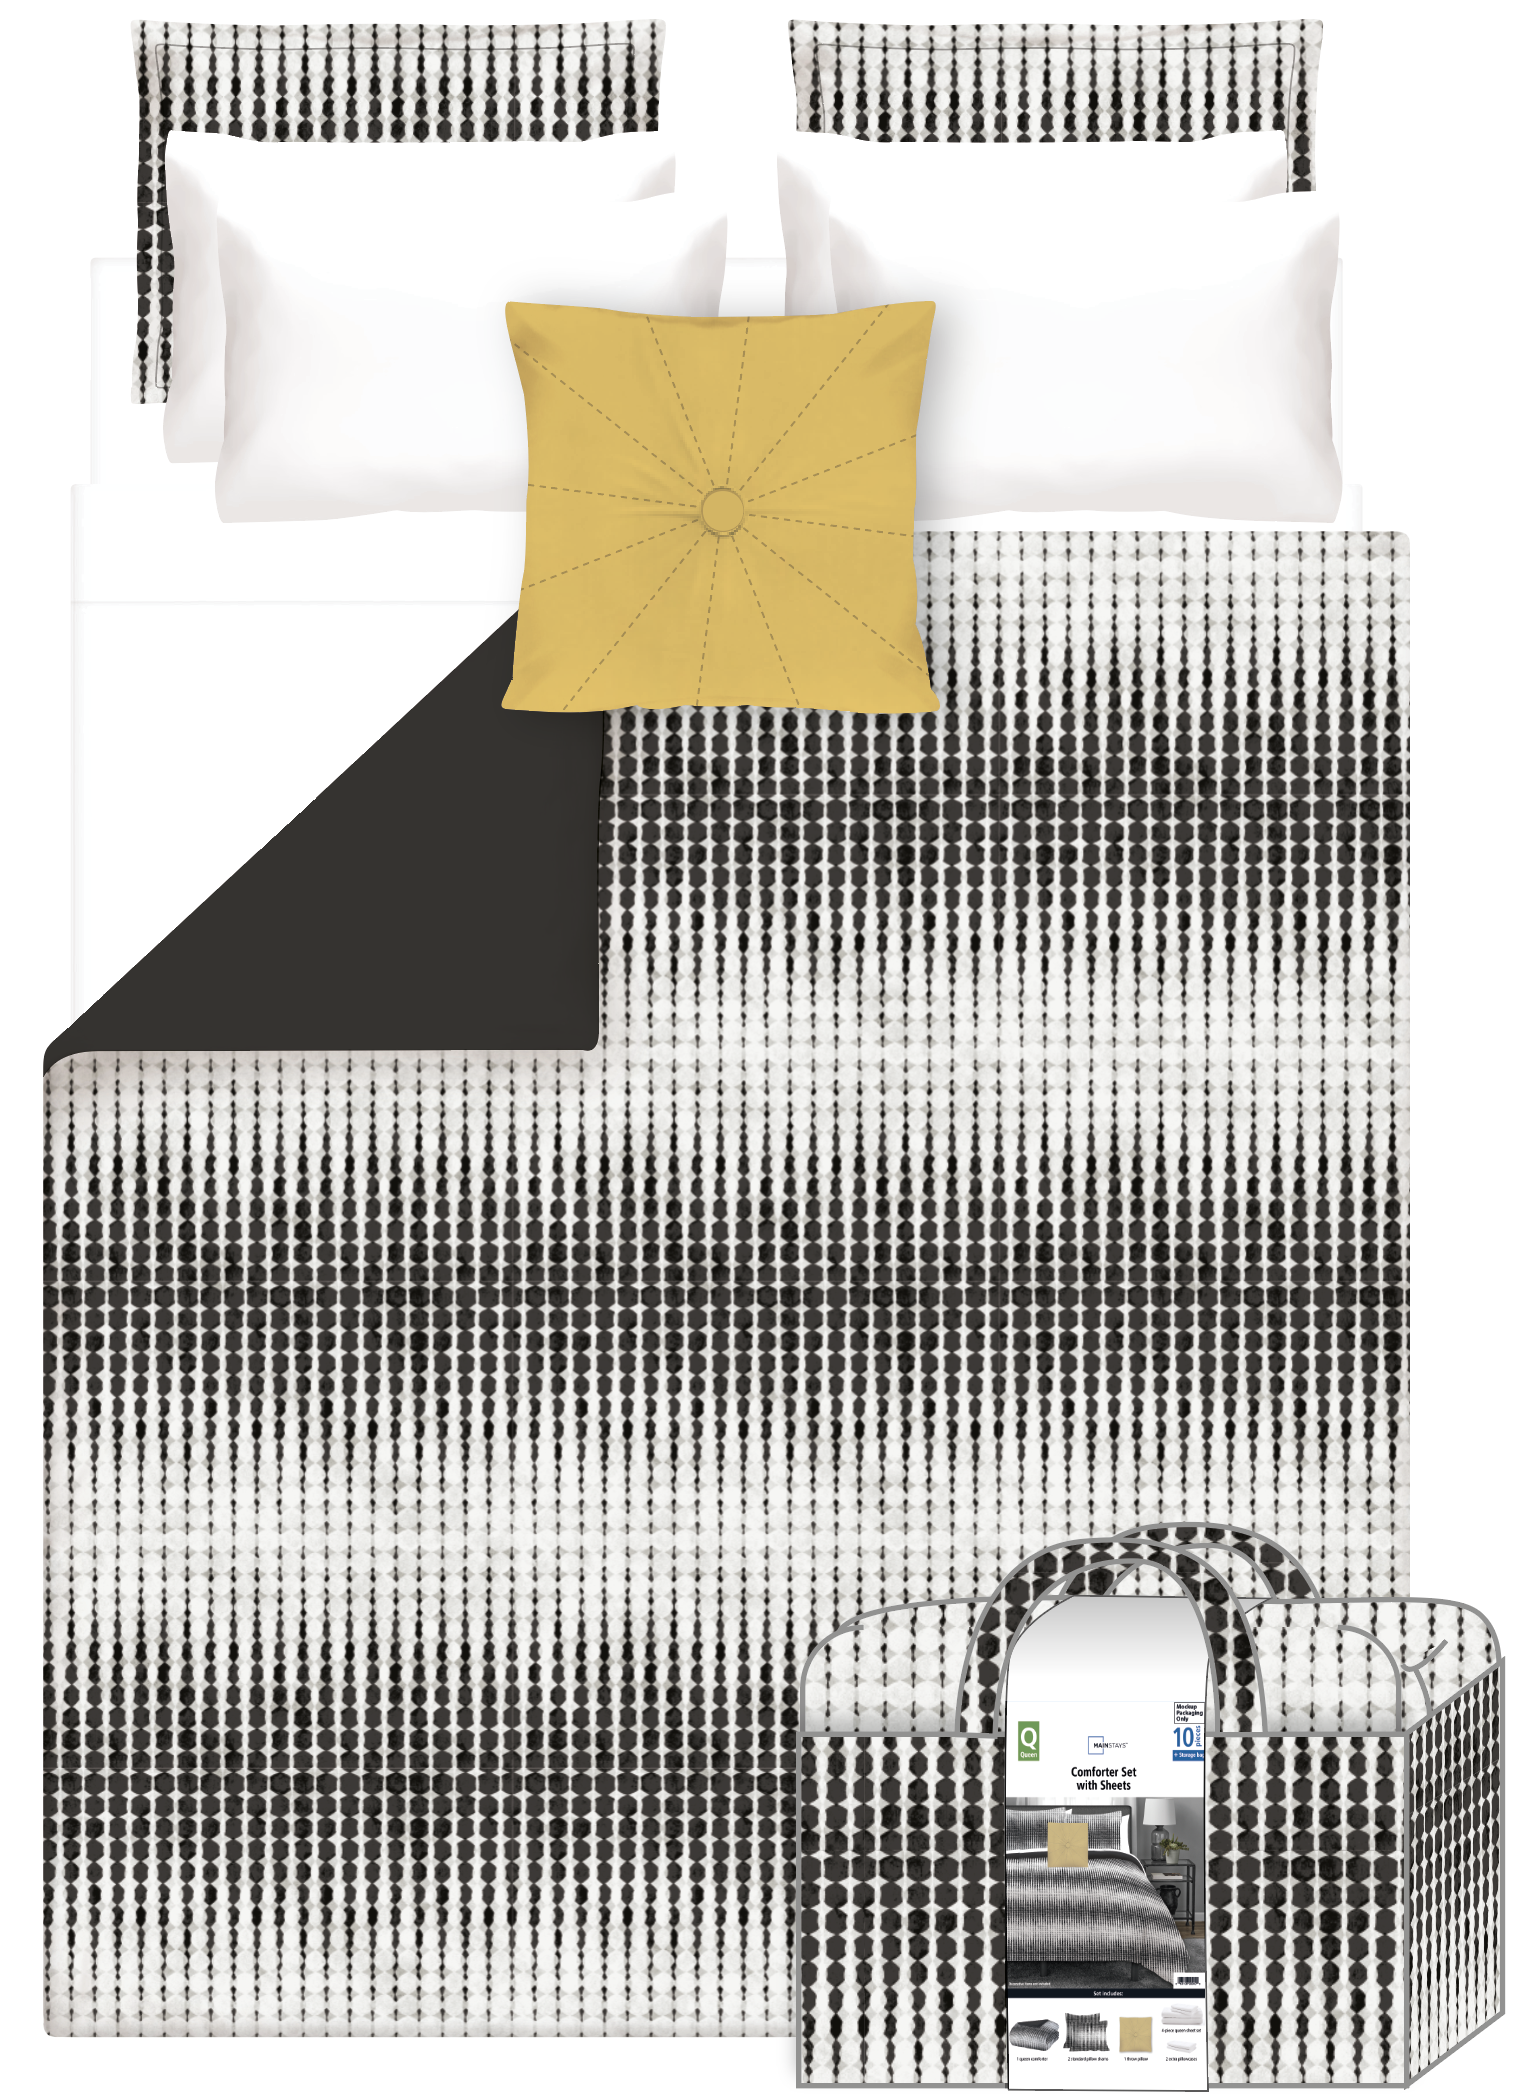 Mainstays Black and White Geo Stripe 10 Piece Bed in a Bag Comforter Set with Sheets, Queen - image 3 of 9